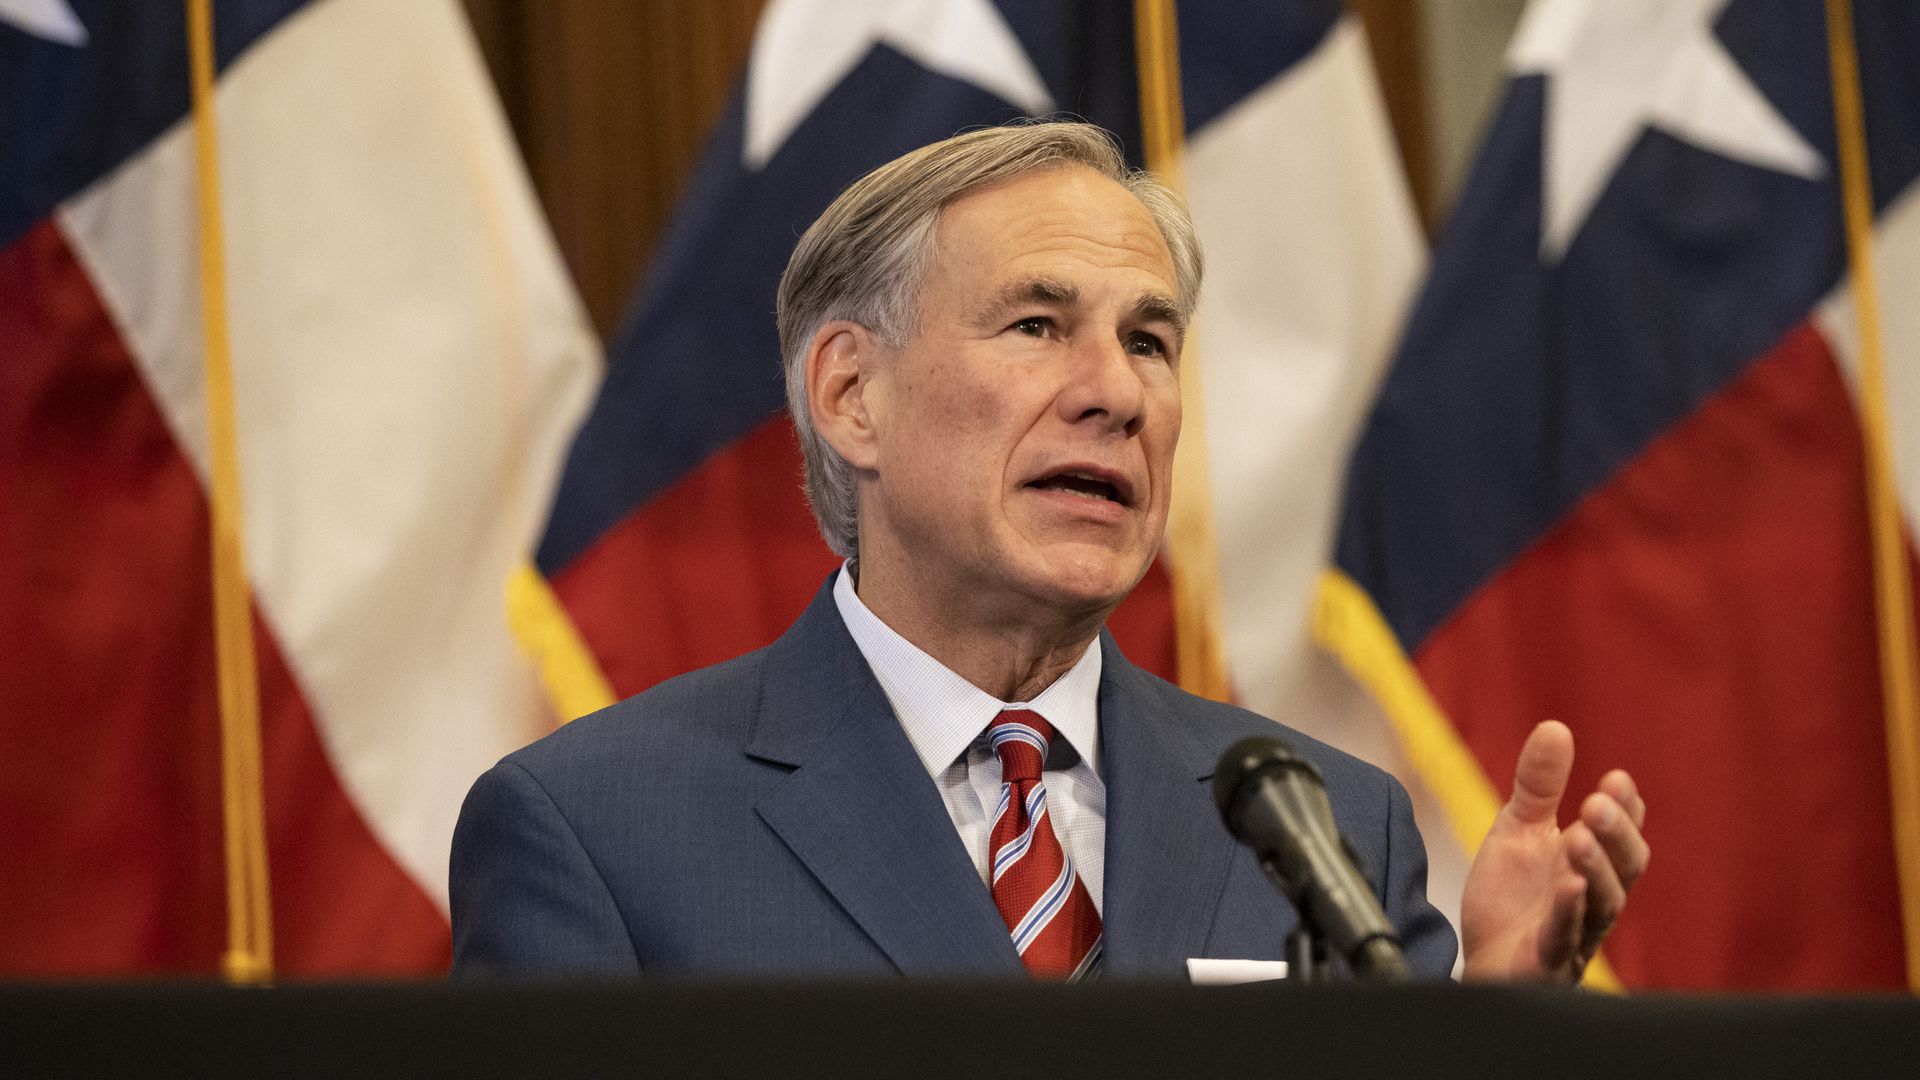 Texas Governor Greg Abbott announces the reopening of more Texas businesses during the COVID-19 pandemic at a press conference at the Texas State Capitol in Austin on Monday, May 18, 2020. 